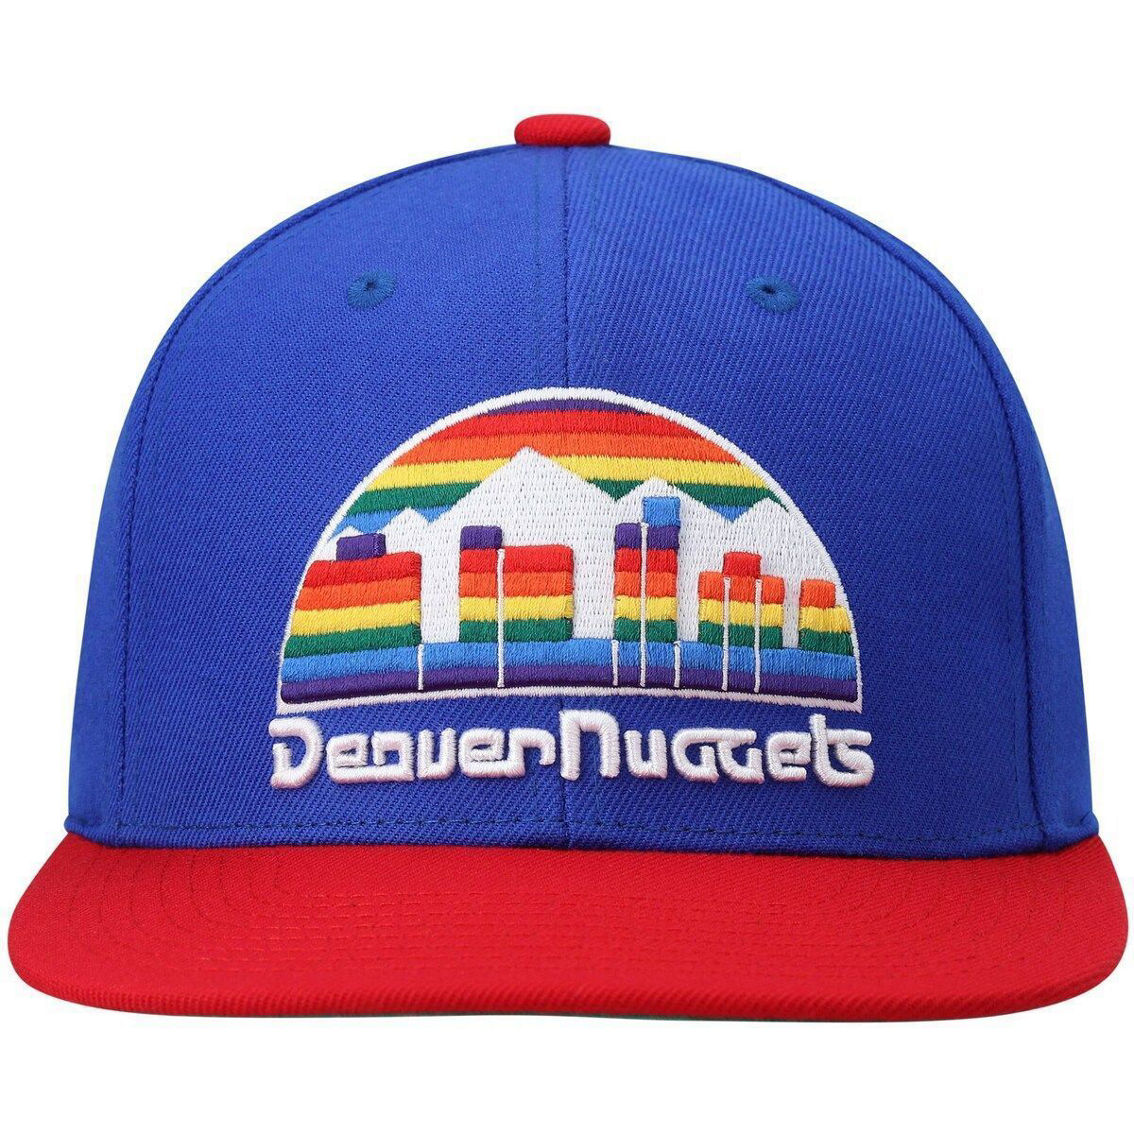 Mitchell & Ness Men's Royal/Red Denver Nuggets Hardwood Classics Team Two-Tone 2.0 Snapback Hat - Image 3 of 4